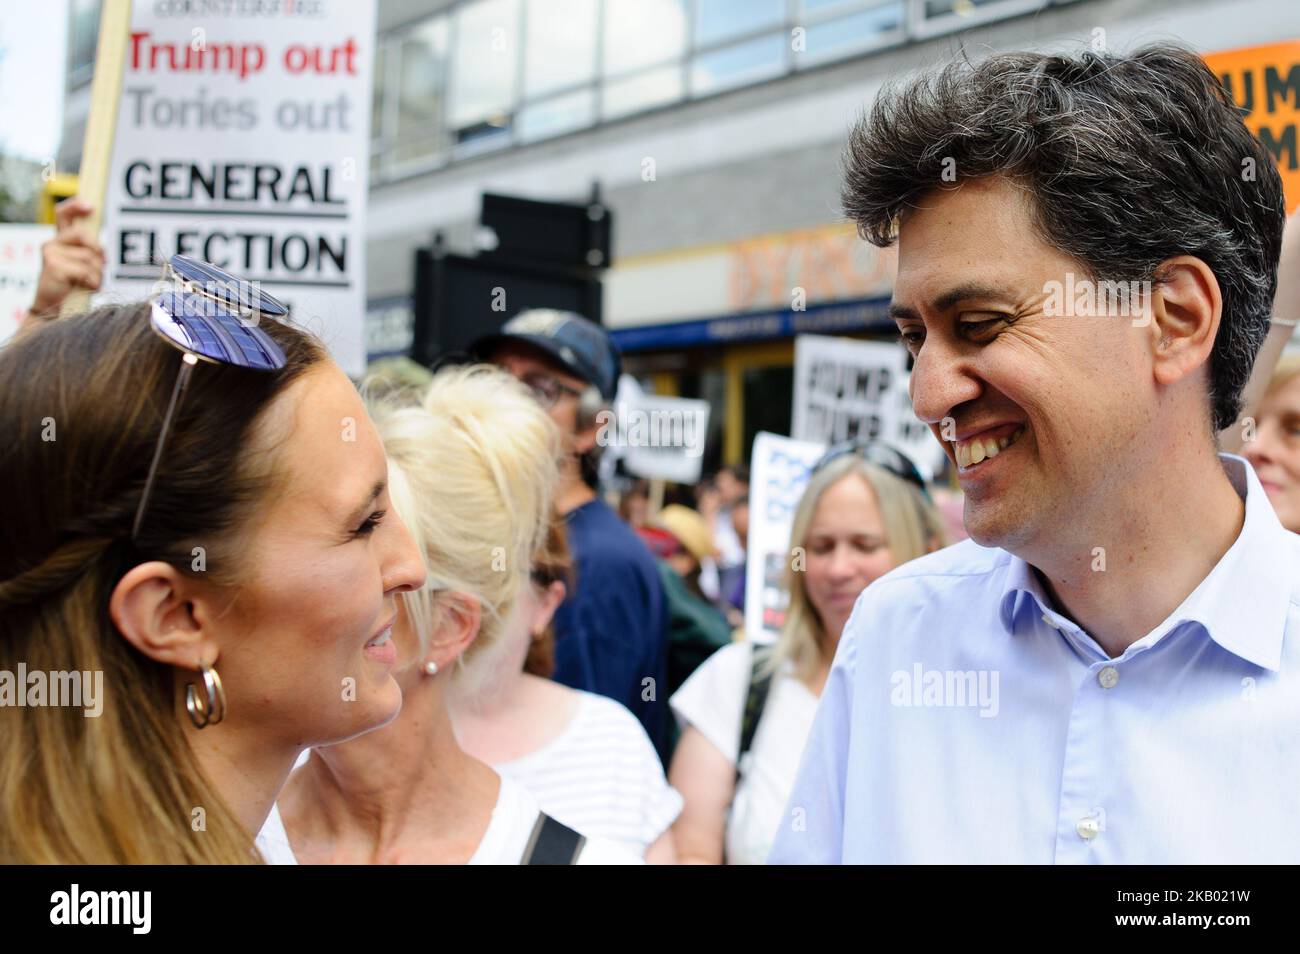 Former leader of the Labour Party Ed Miliband (right) gives an interview as demonstrators opposing the UK visit of US President Donald Trump protest in London, England, on July 13, 2018. President Trump arrived on British soil yesterday on his first visit to the UK since taking office. Protests have been planned across the country – today in London in particular, although Mr Trump is spending the day outside the city. (Photo by David Cliff/NurPhoto) Stock Photo